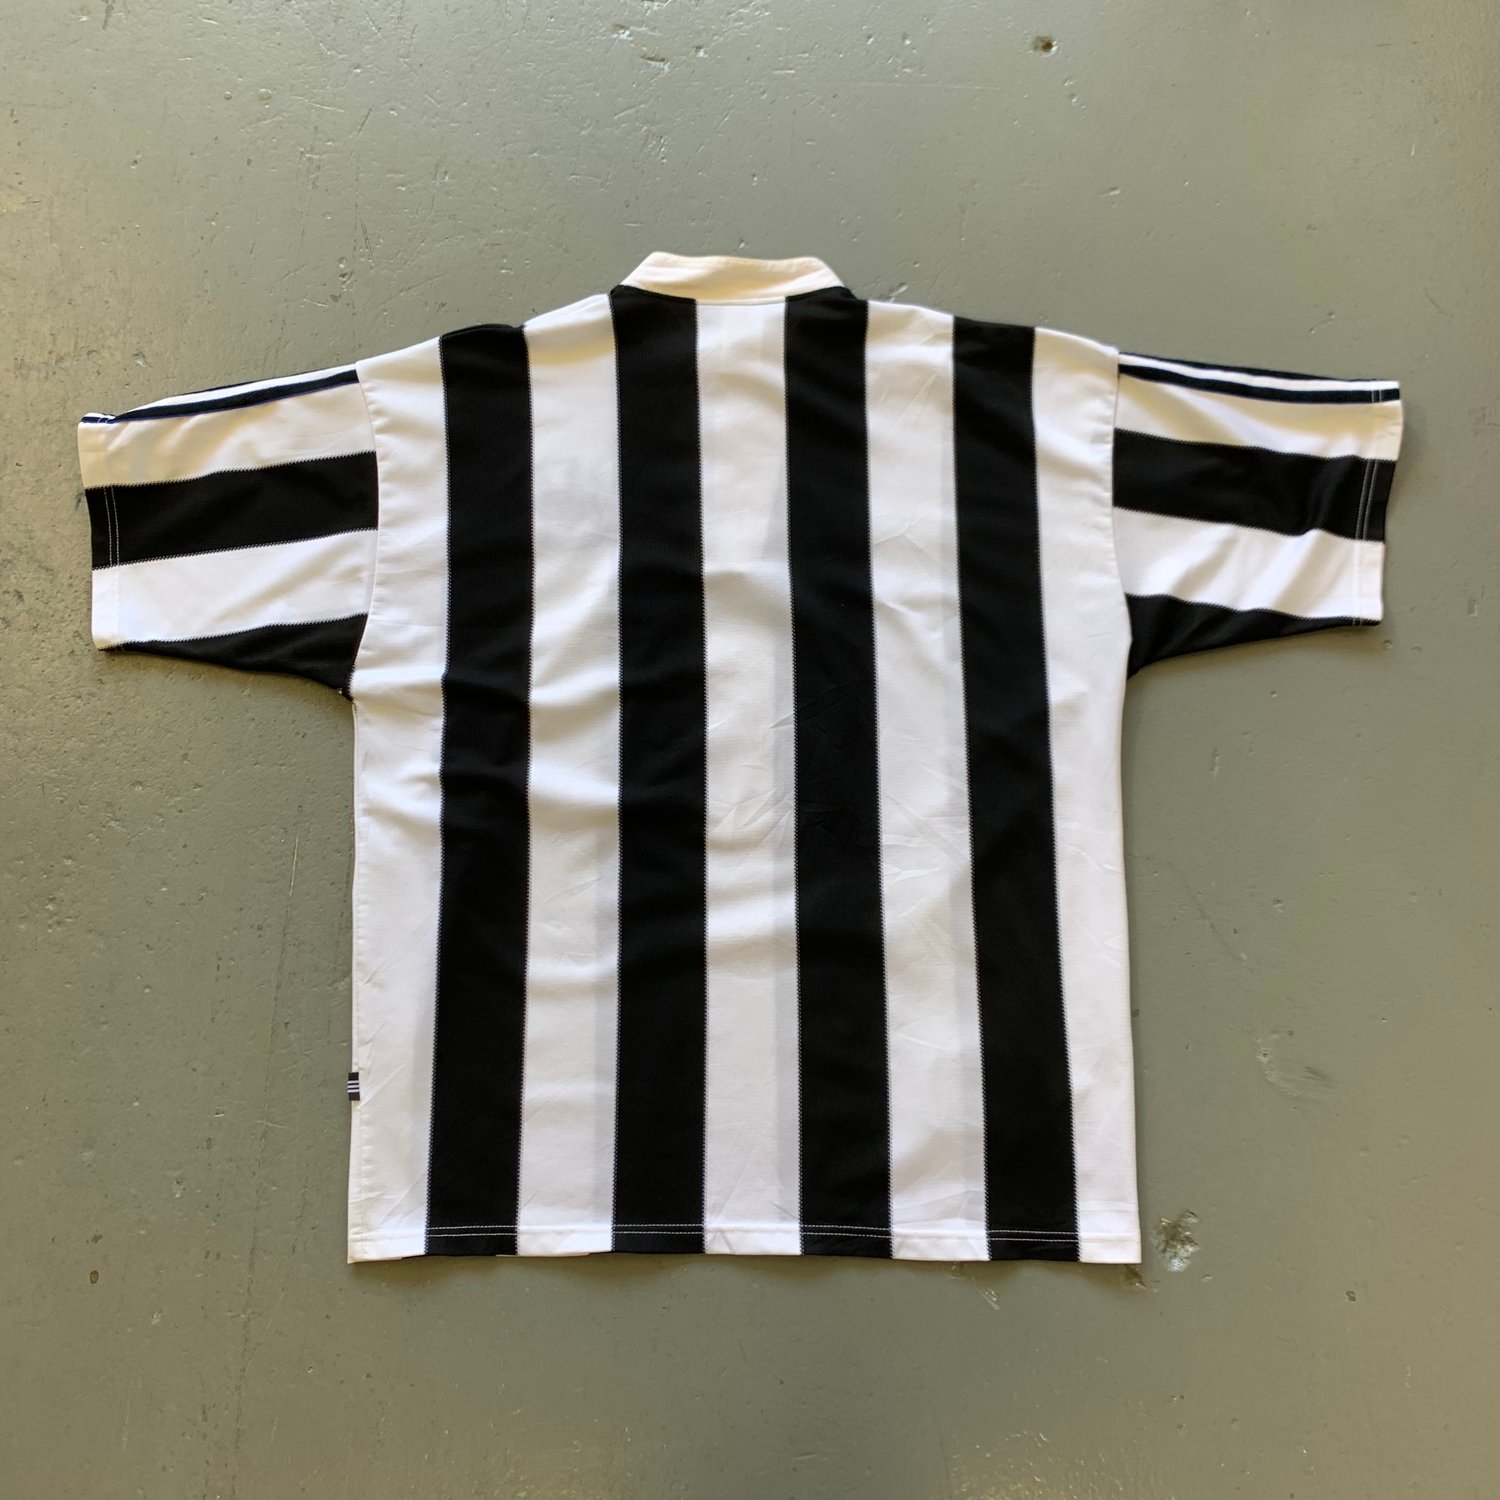 Image of 95/96 Newcastle Home shirt size xl 